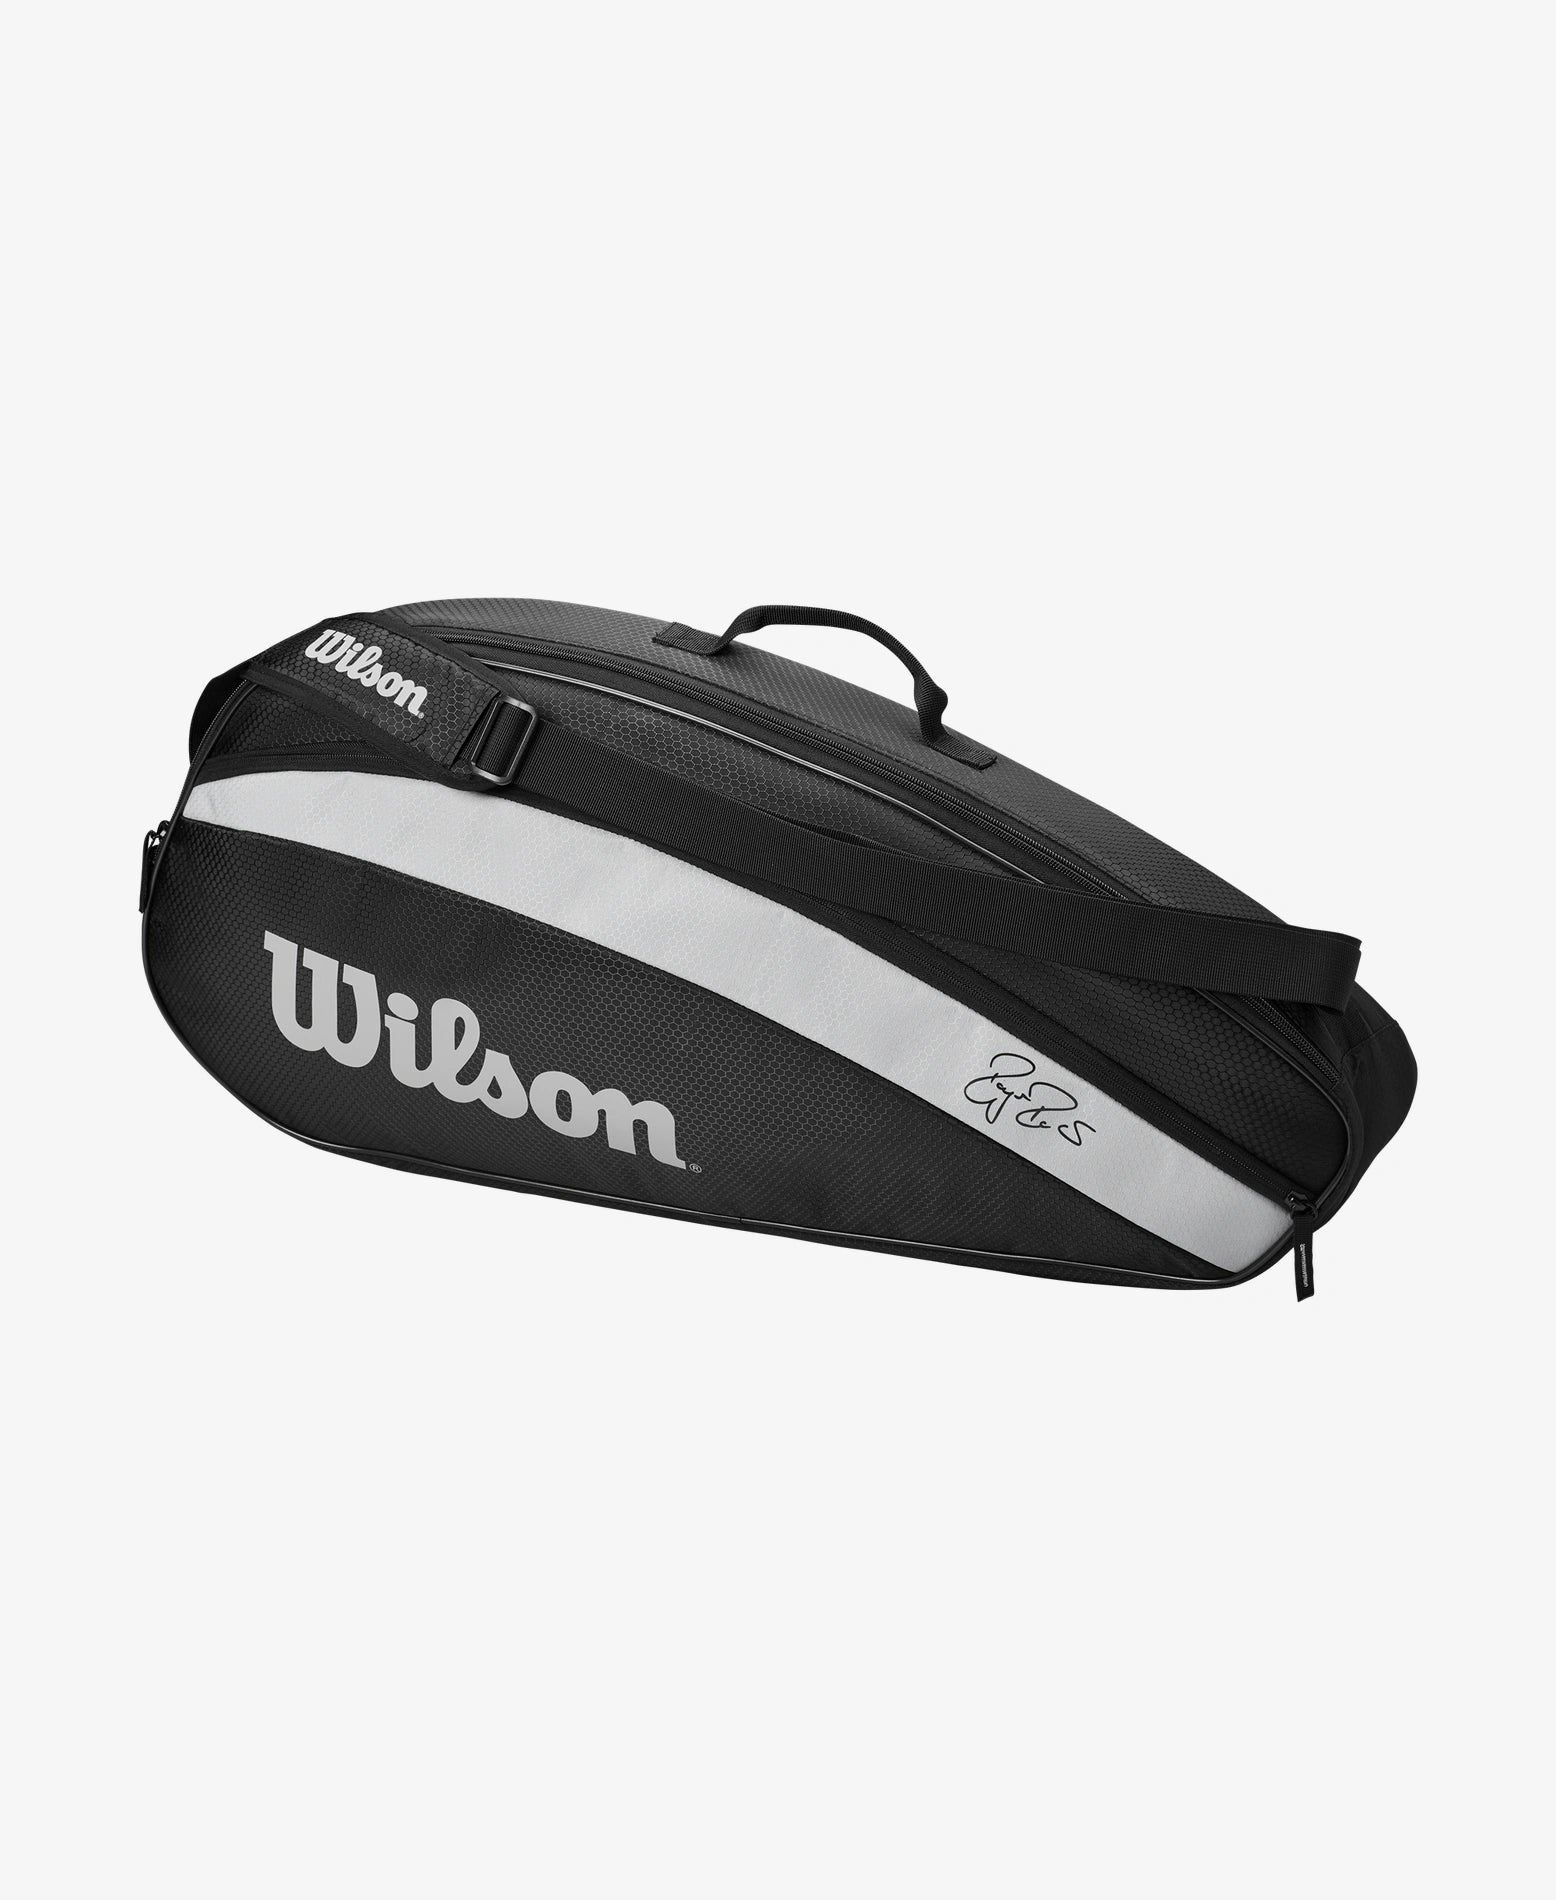 The Wilson Roger Federer Team 3 Pack Racket Bag in black available for sale at GSM Sports.    